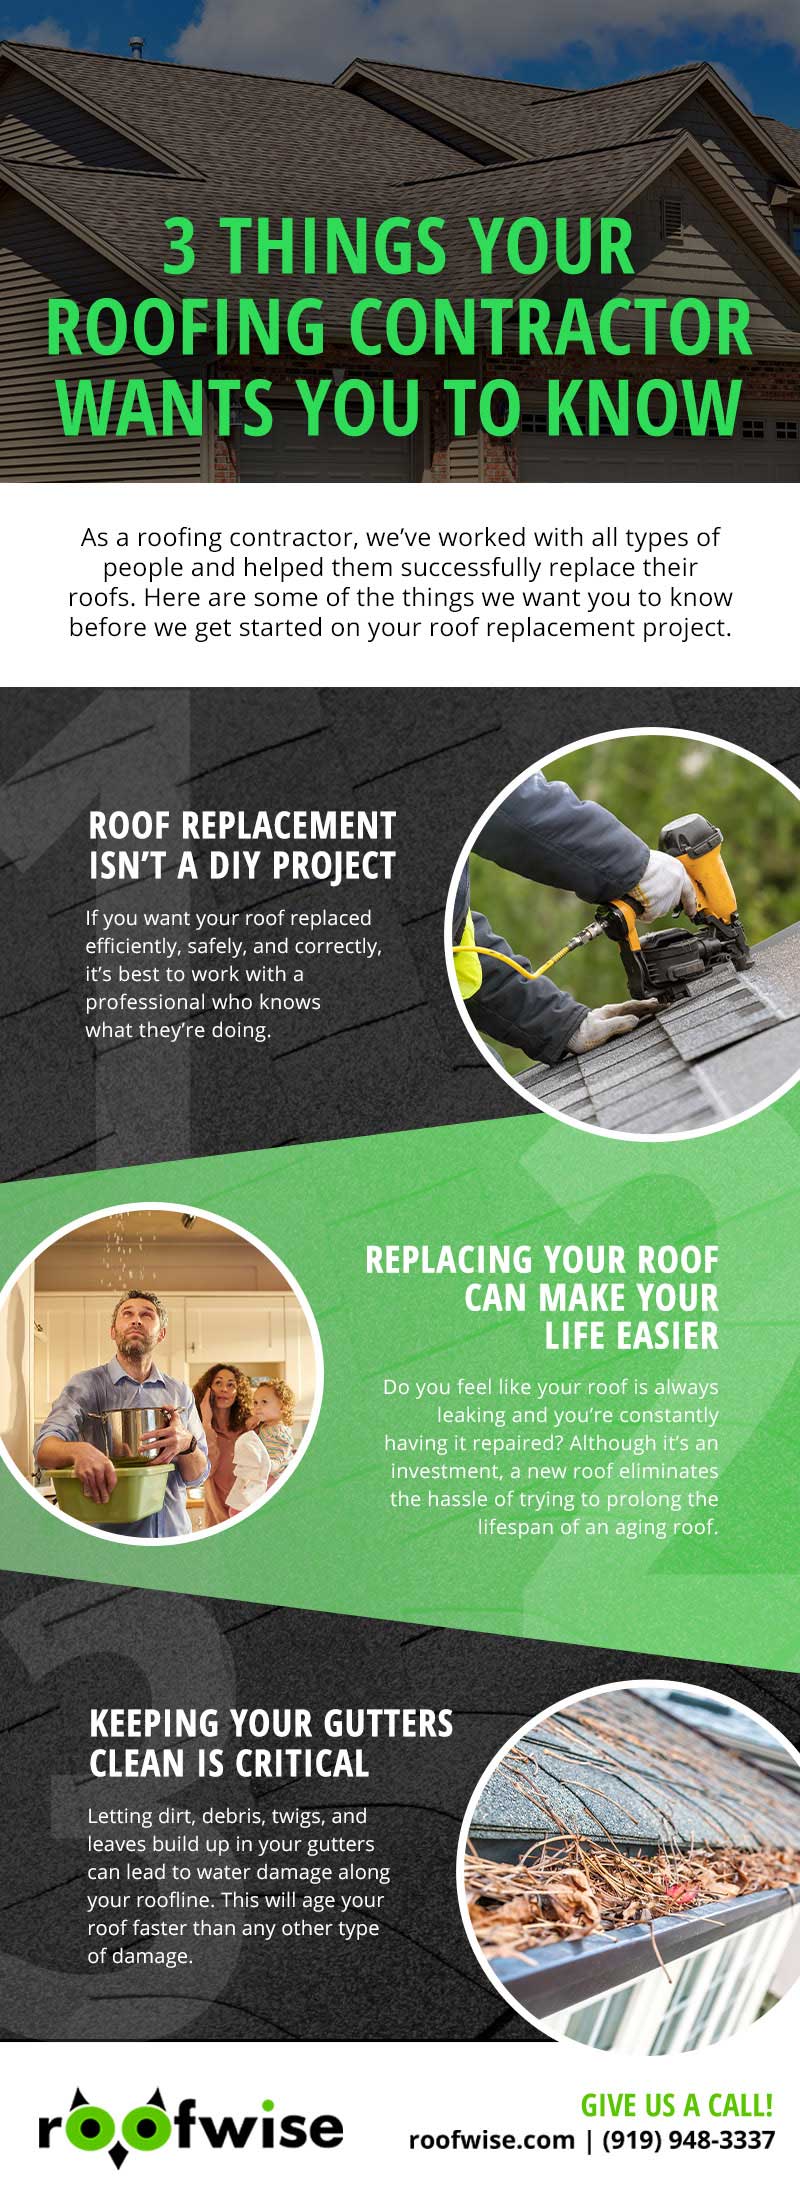 Three Things Your Roofing Contractor Wants You to Know